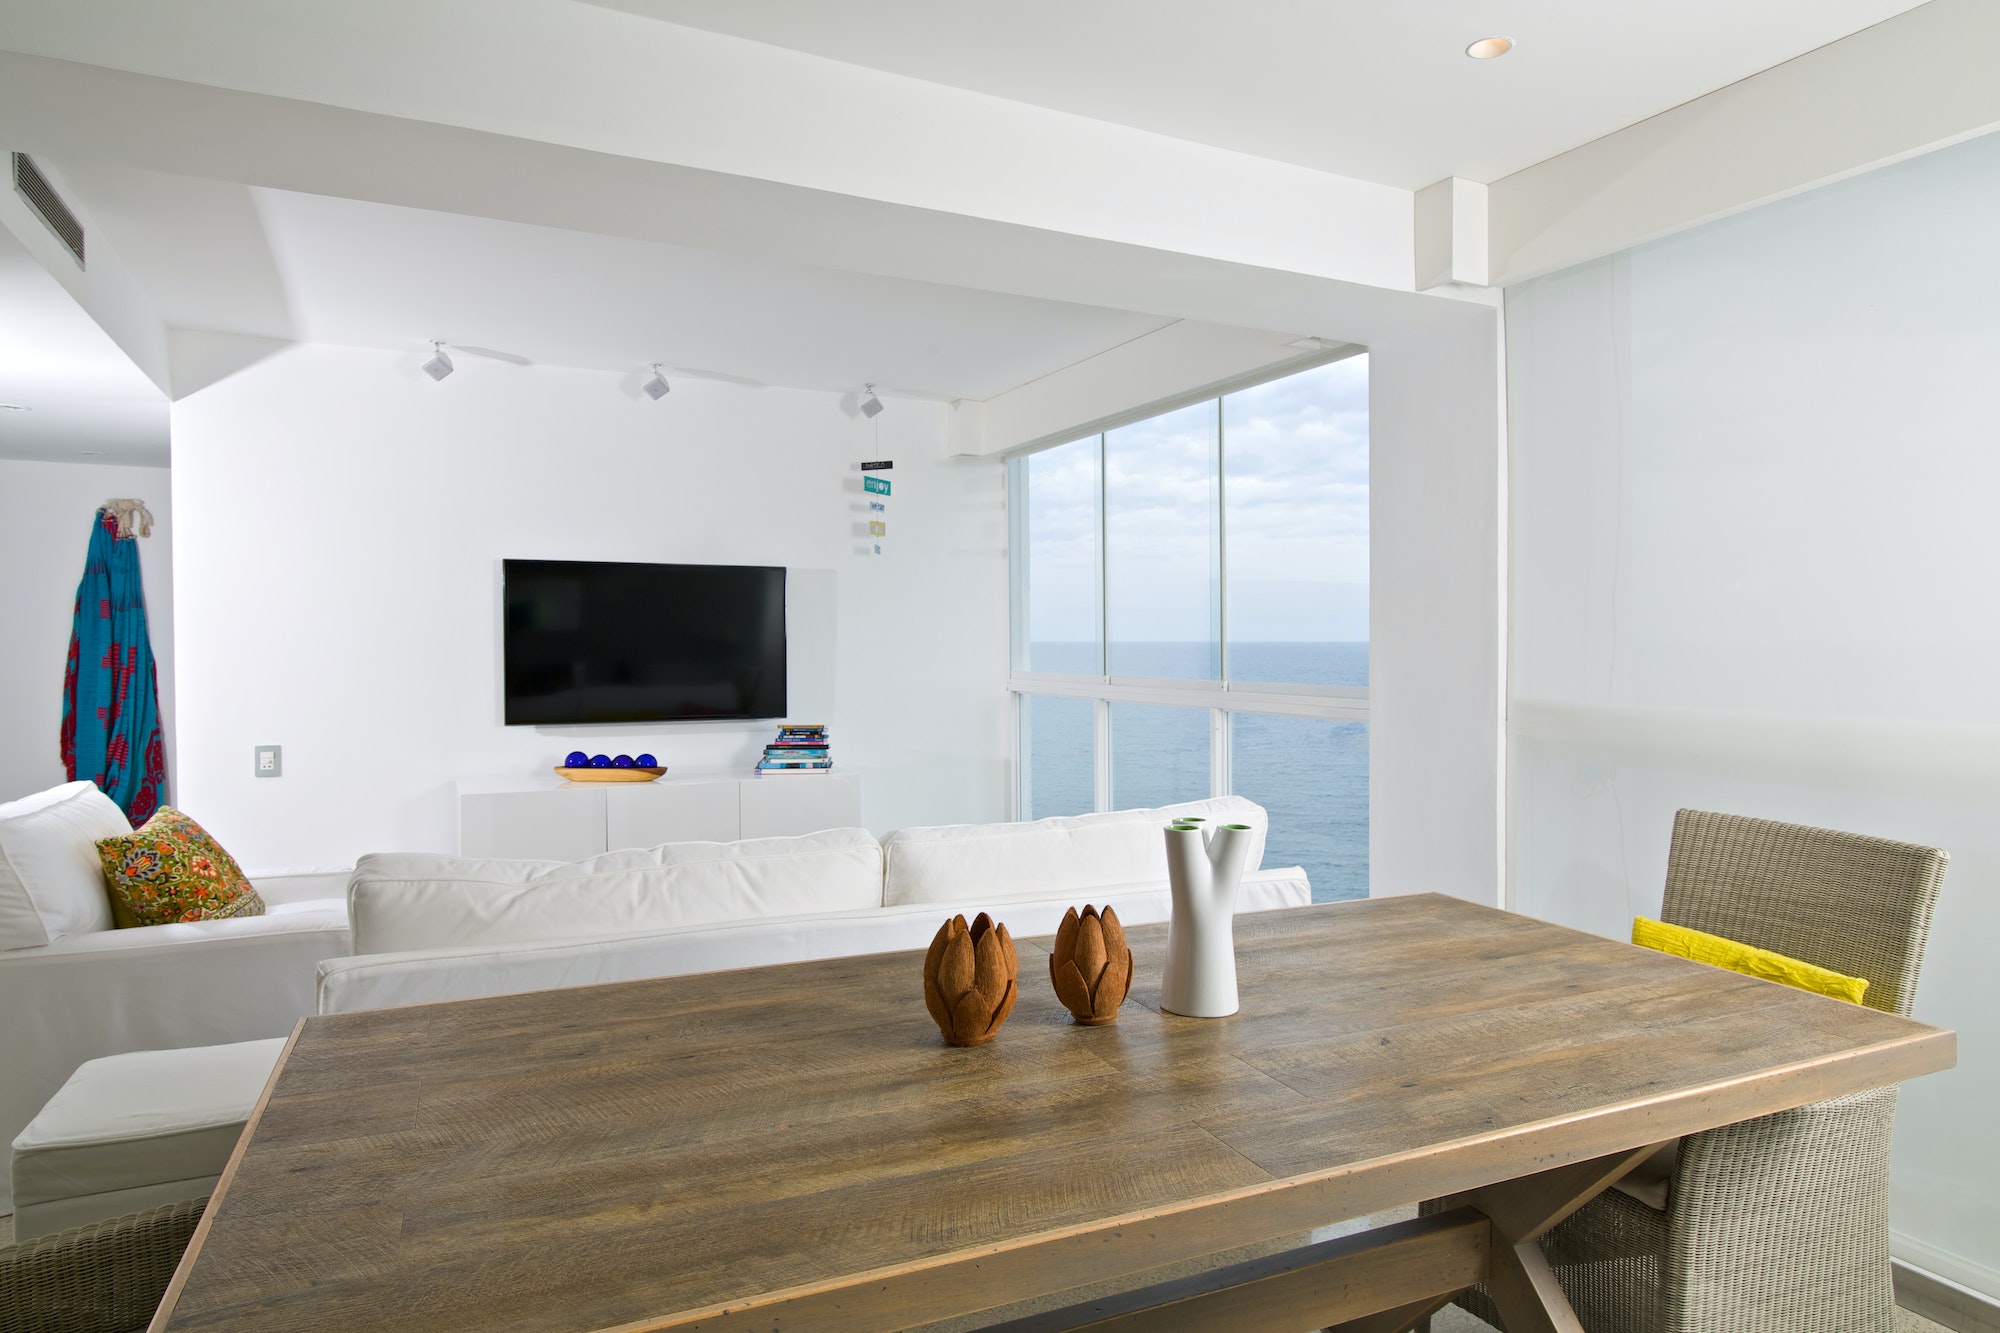 Interior of apartment, living room overlooking the sea.